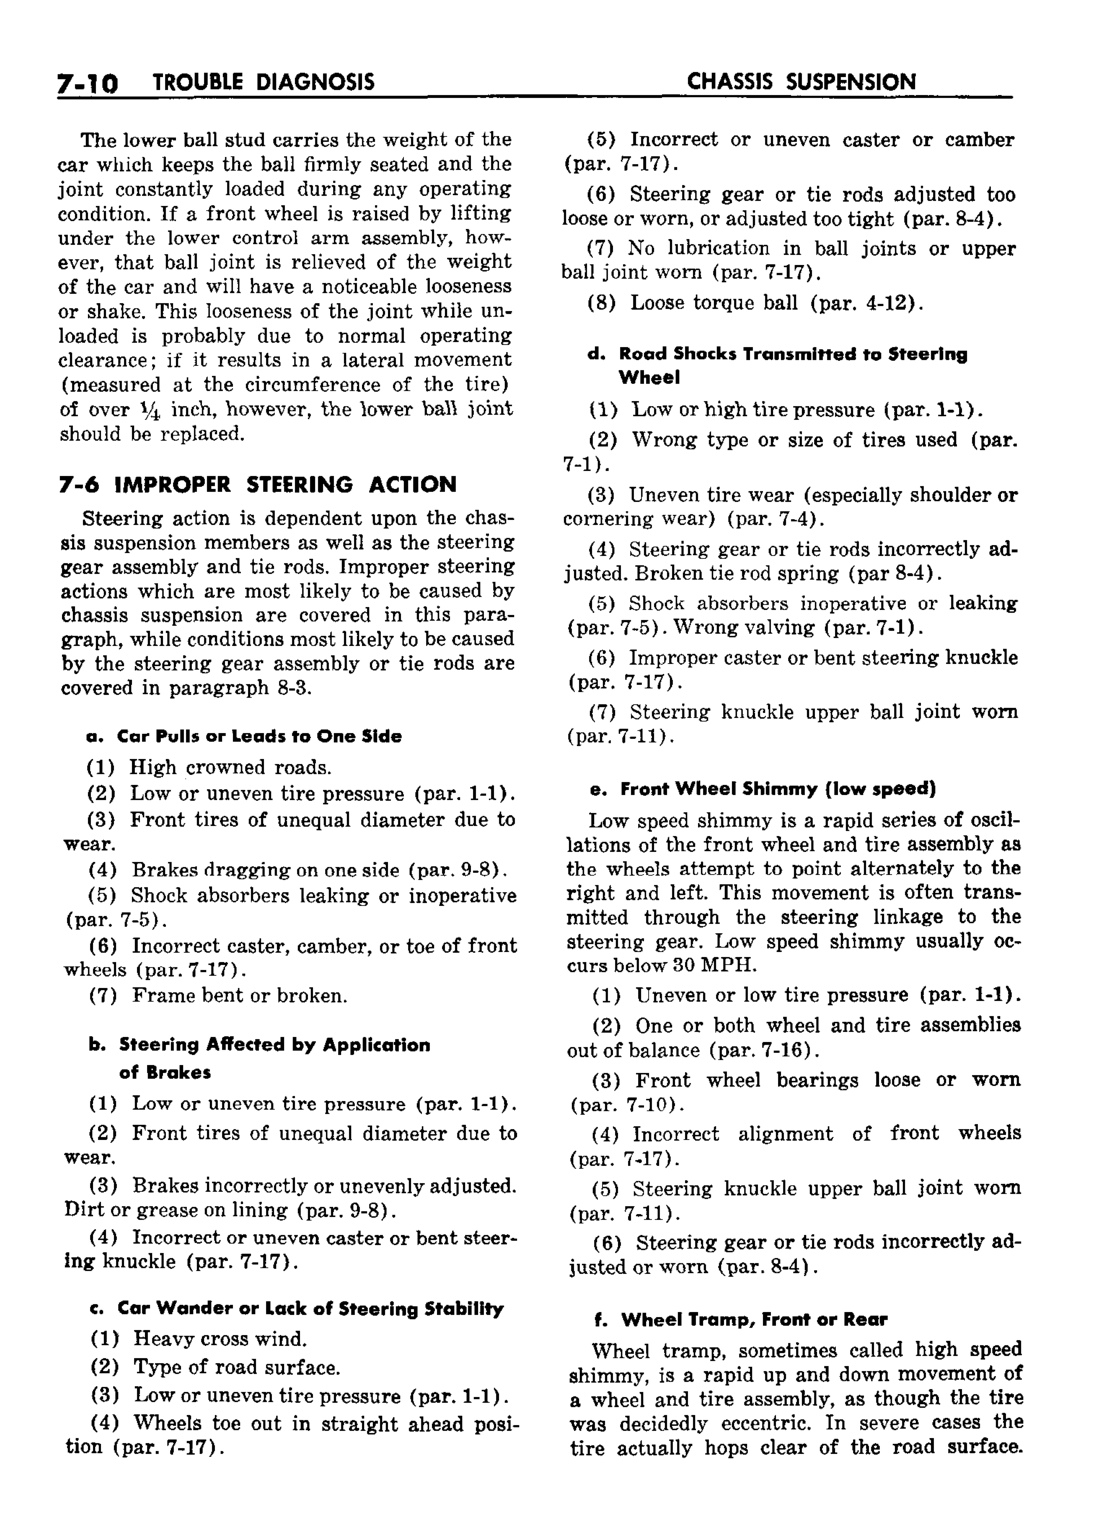 n_08 1959 Buick Shop Manual - Chassis Suspension-010-010.jpg